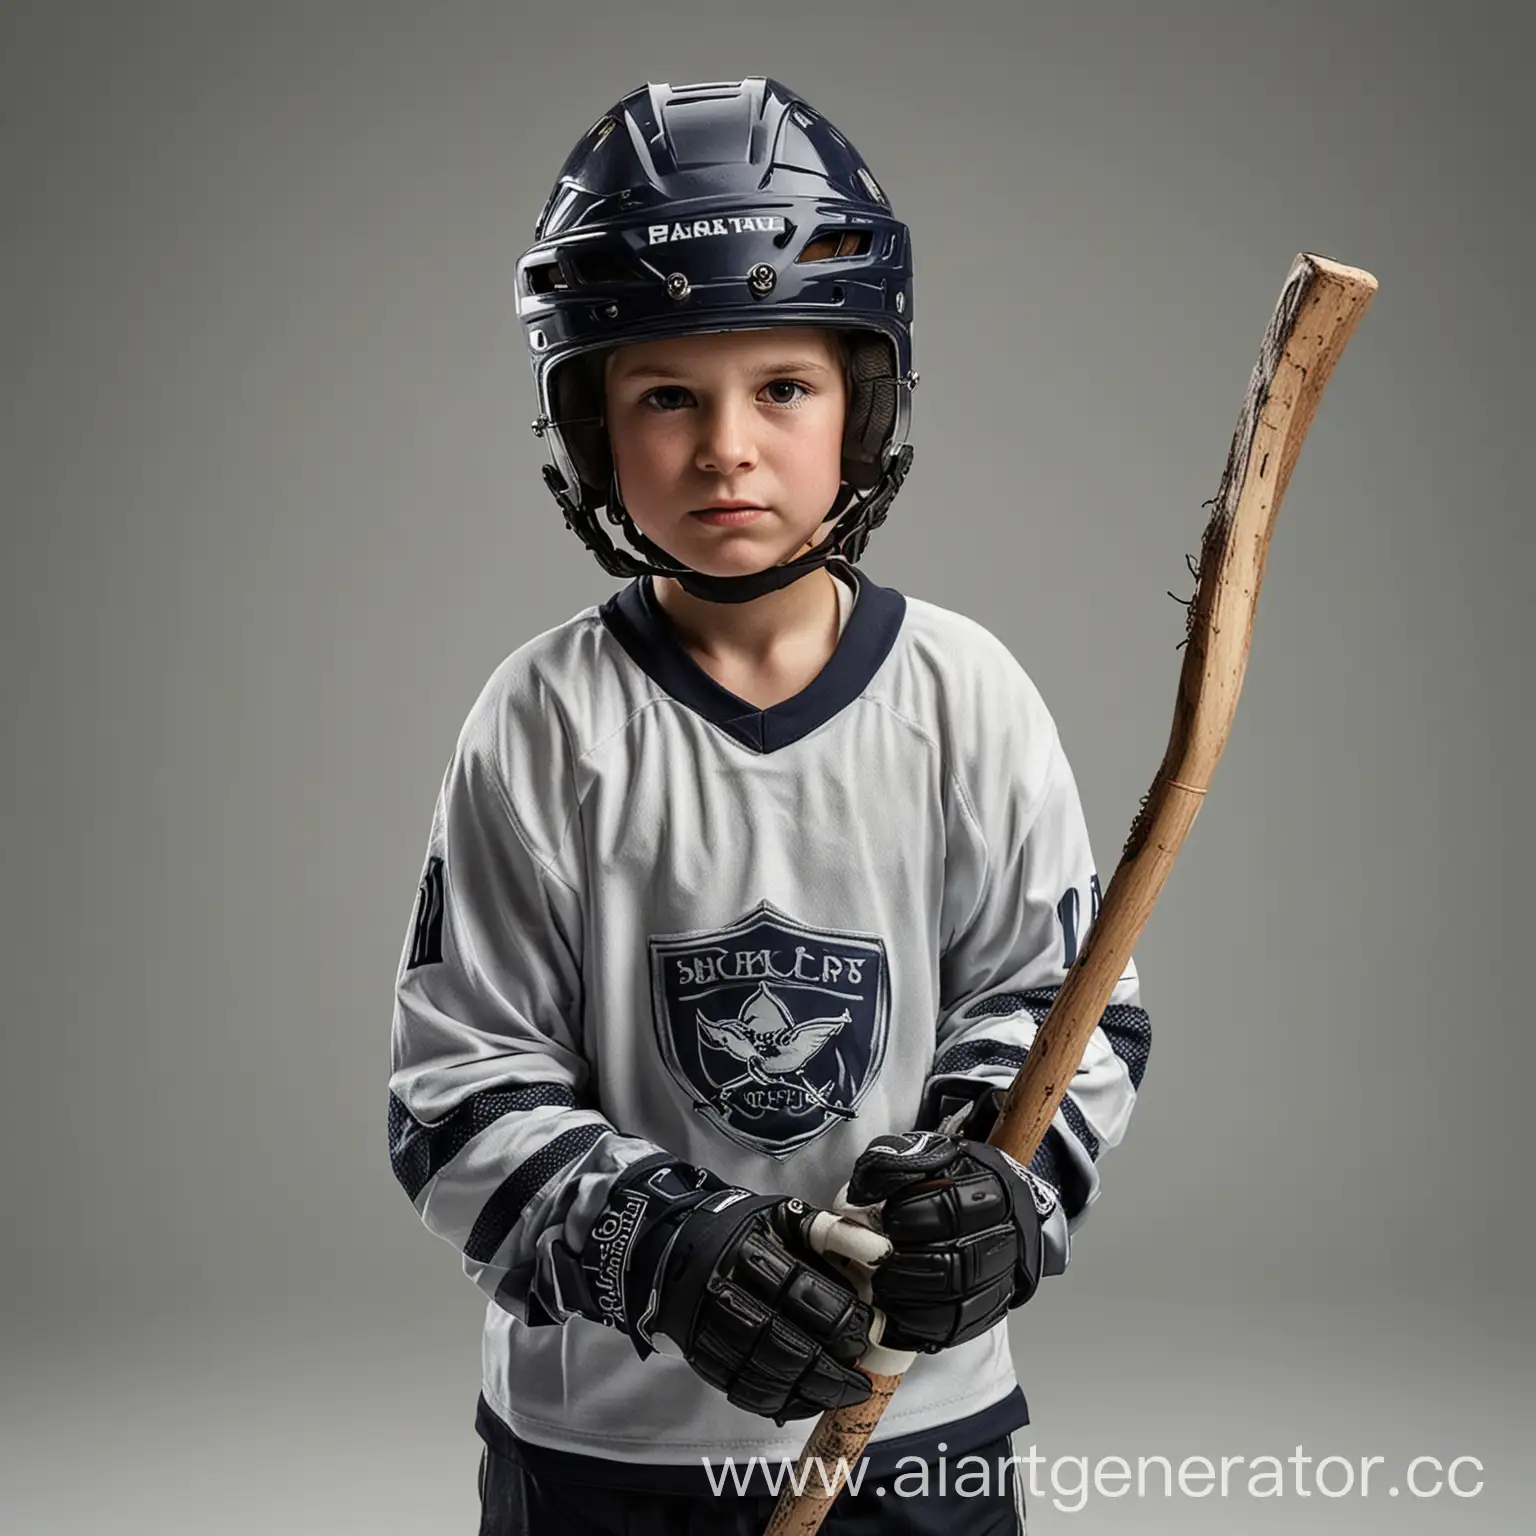 Young-Hockey-Player-in-Helmet-Holding-Stick